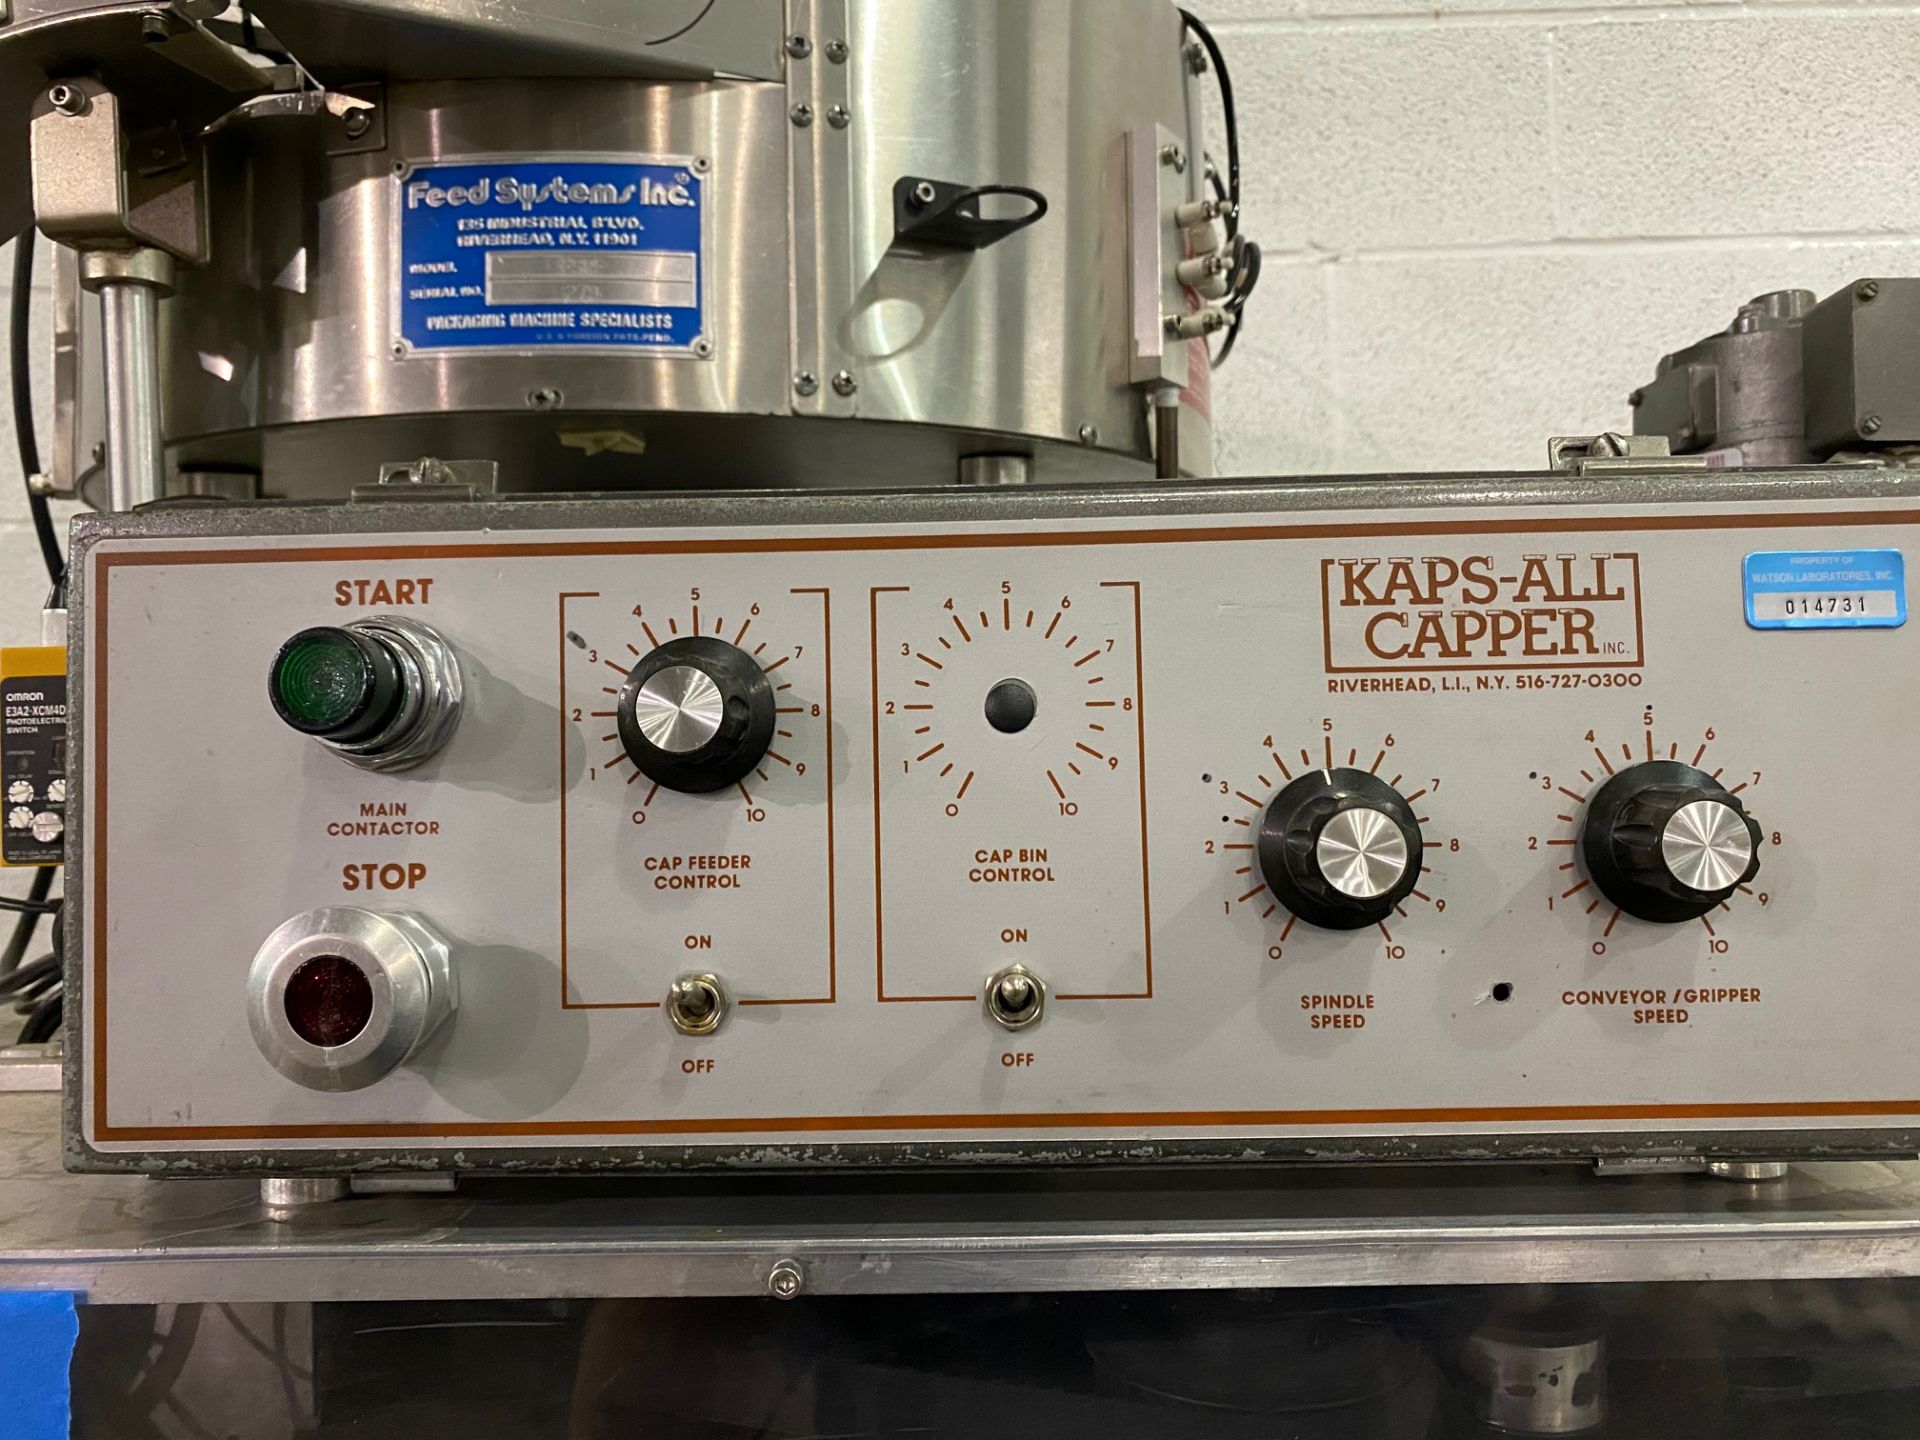 Kaps-All Model A-2 Caper sn 2244, Complete w/ Feed Systems Inc Model FSRF 22 Laboratory Feeder - Image 3 of 9